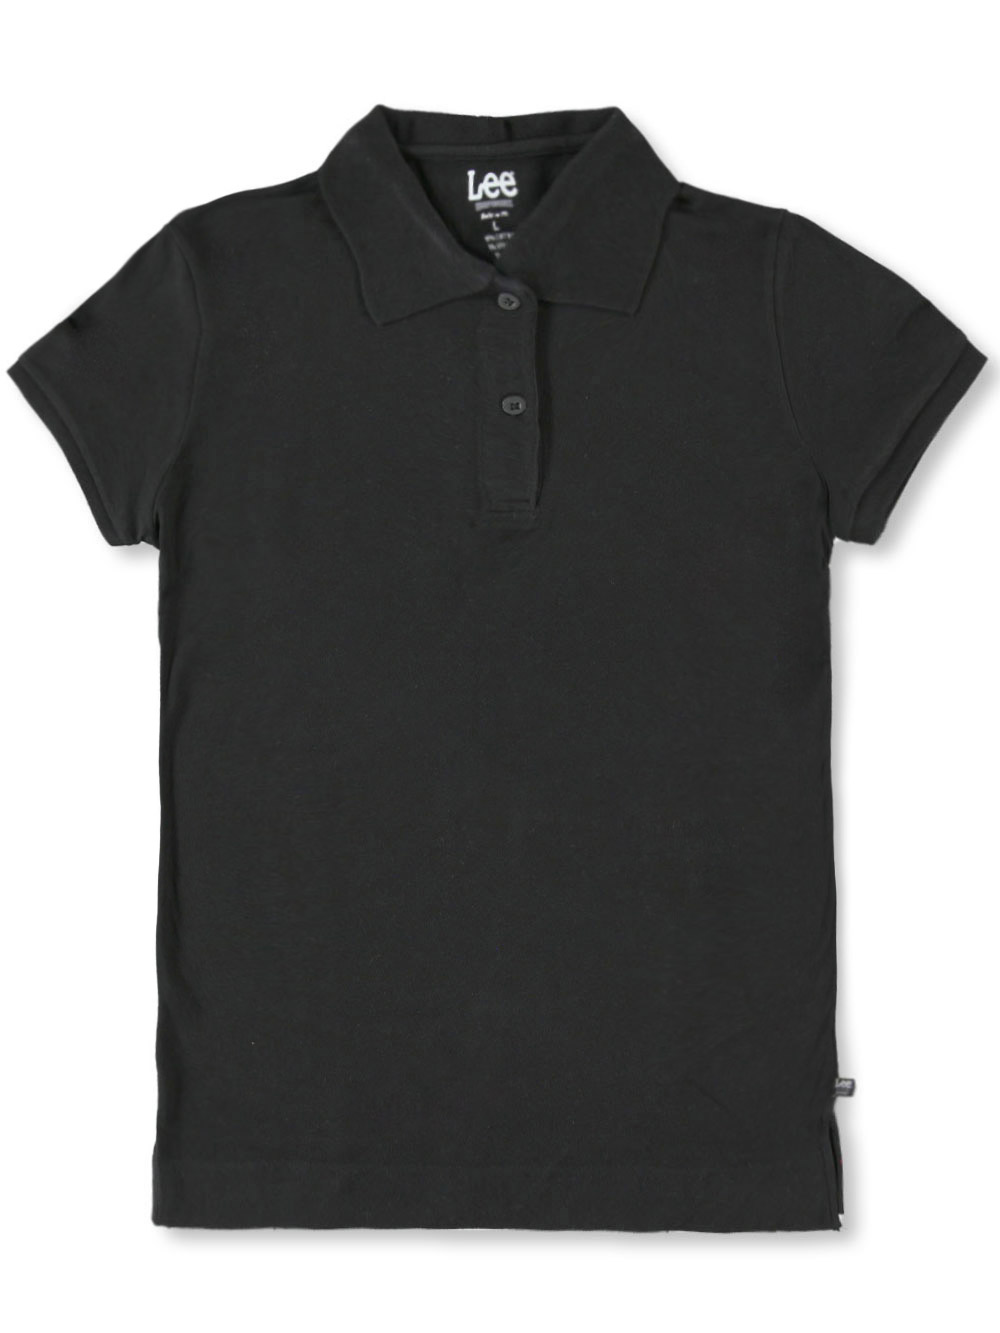 Black and White Polos